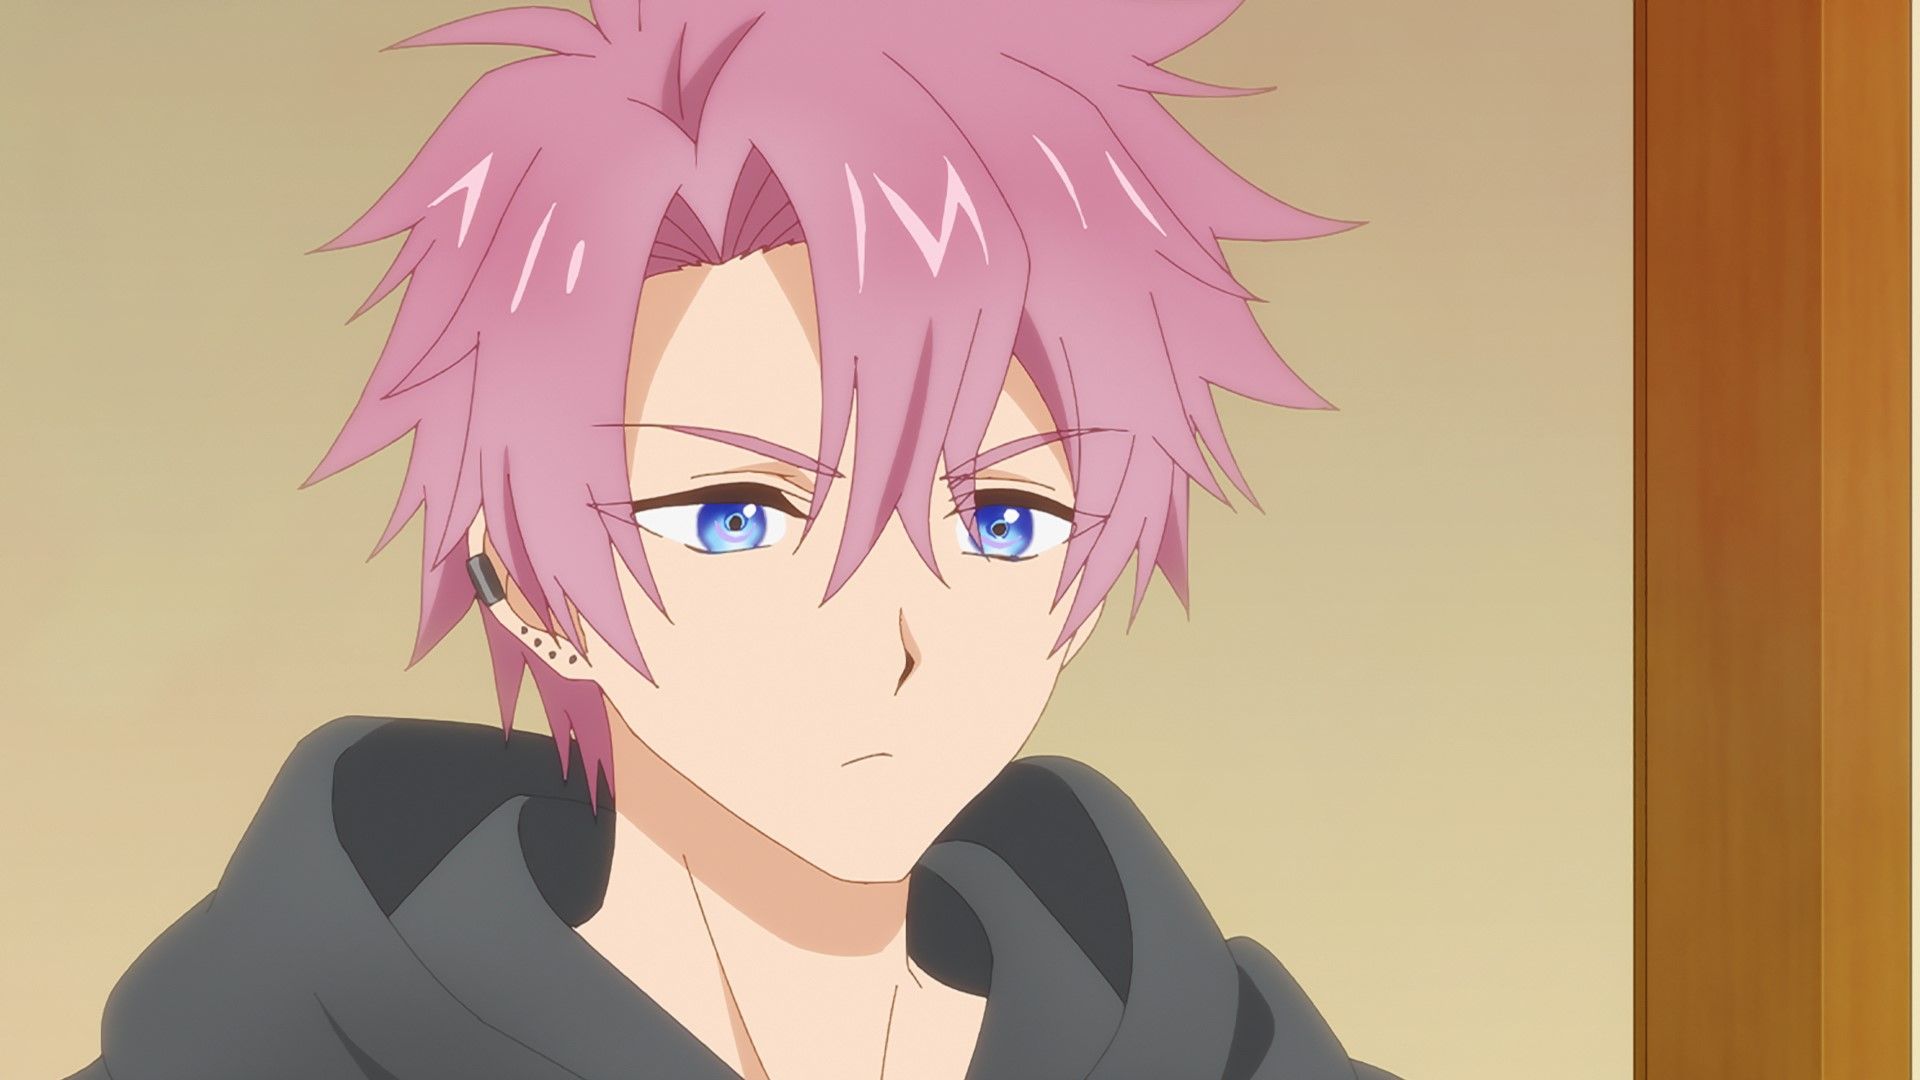 What are some of the best animes with pink-haired main characters? - Quora